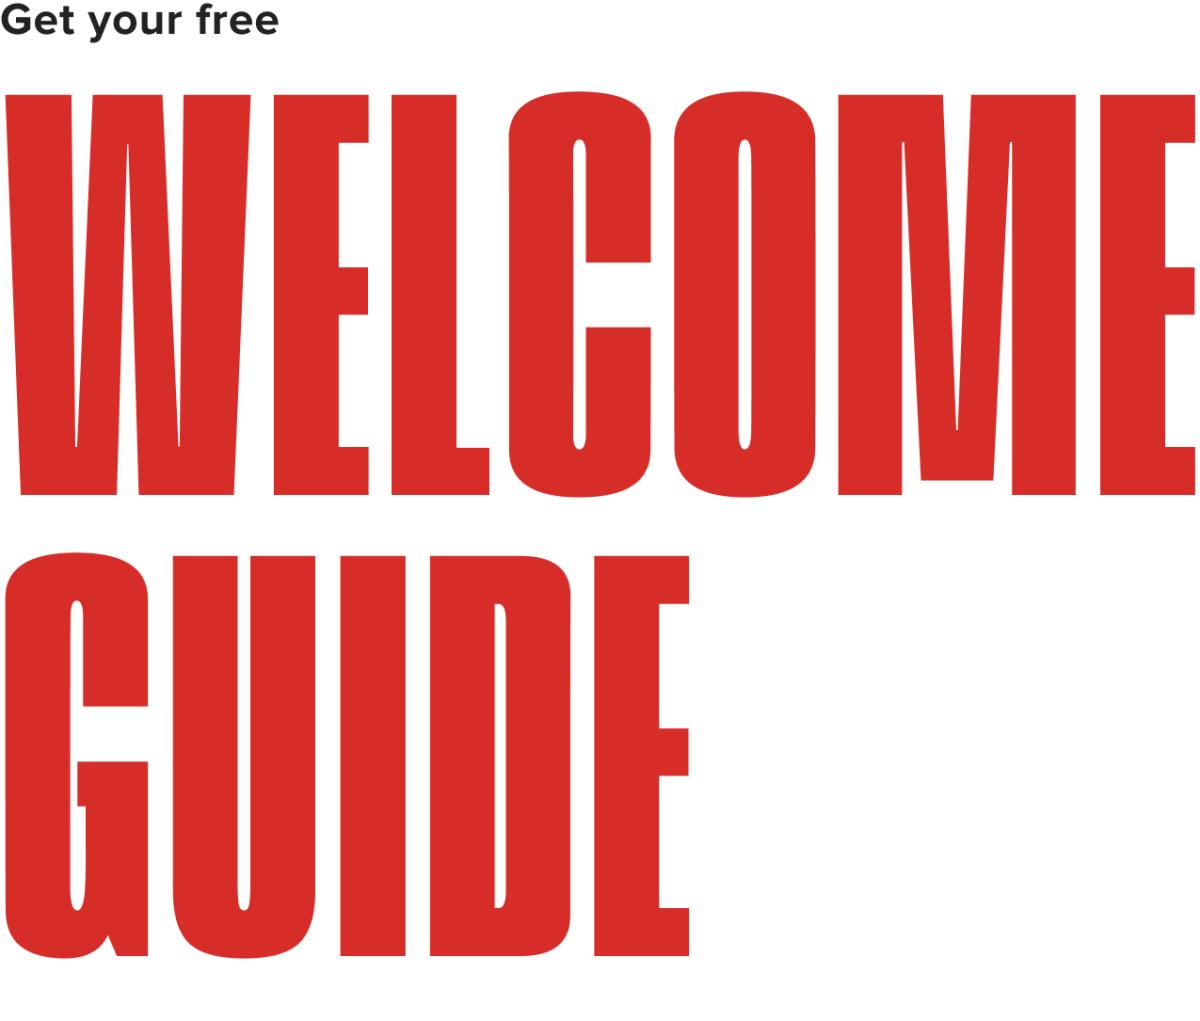 Get your free welcome guide